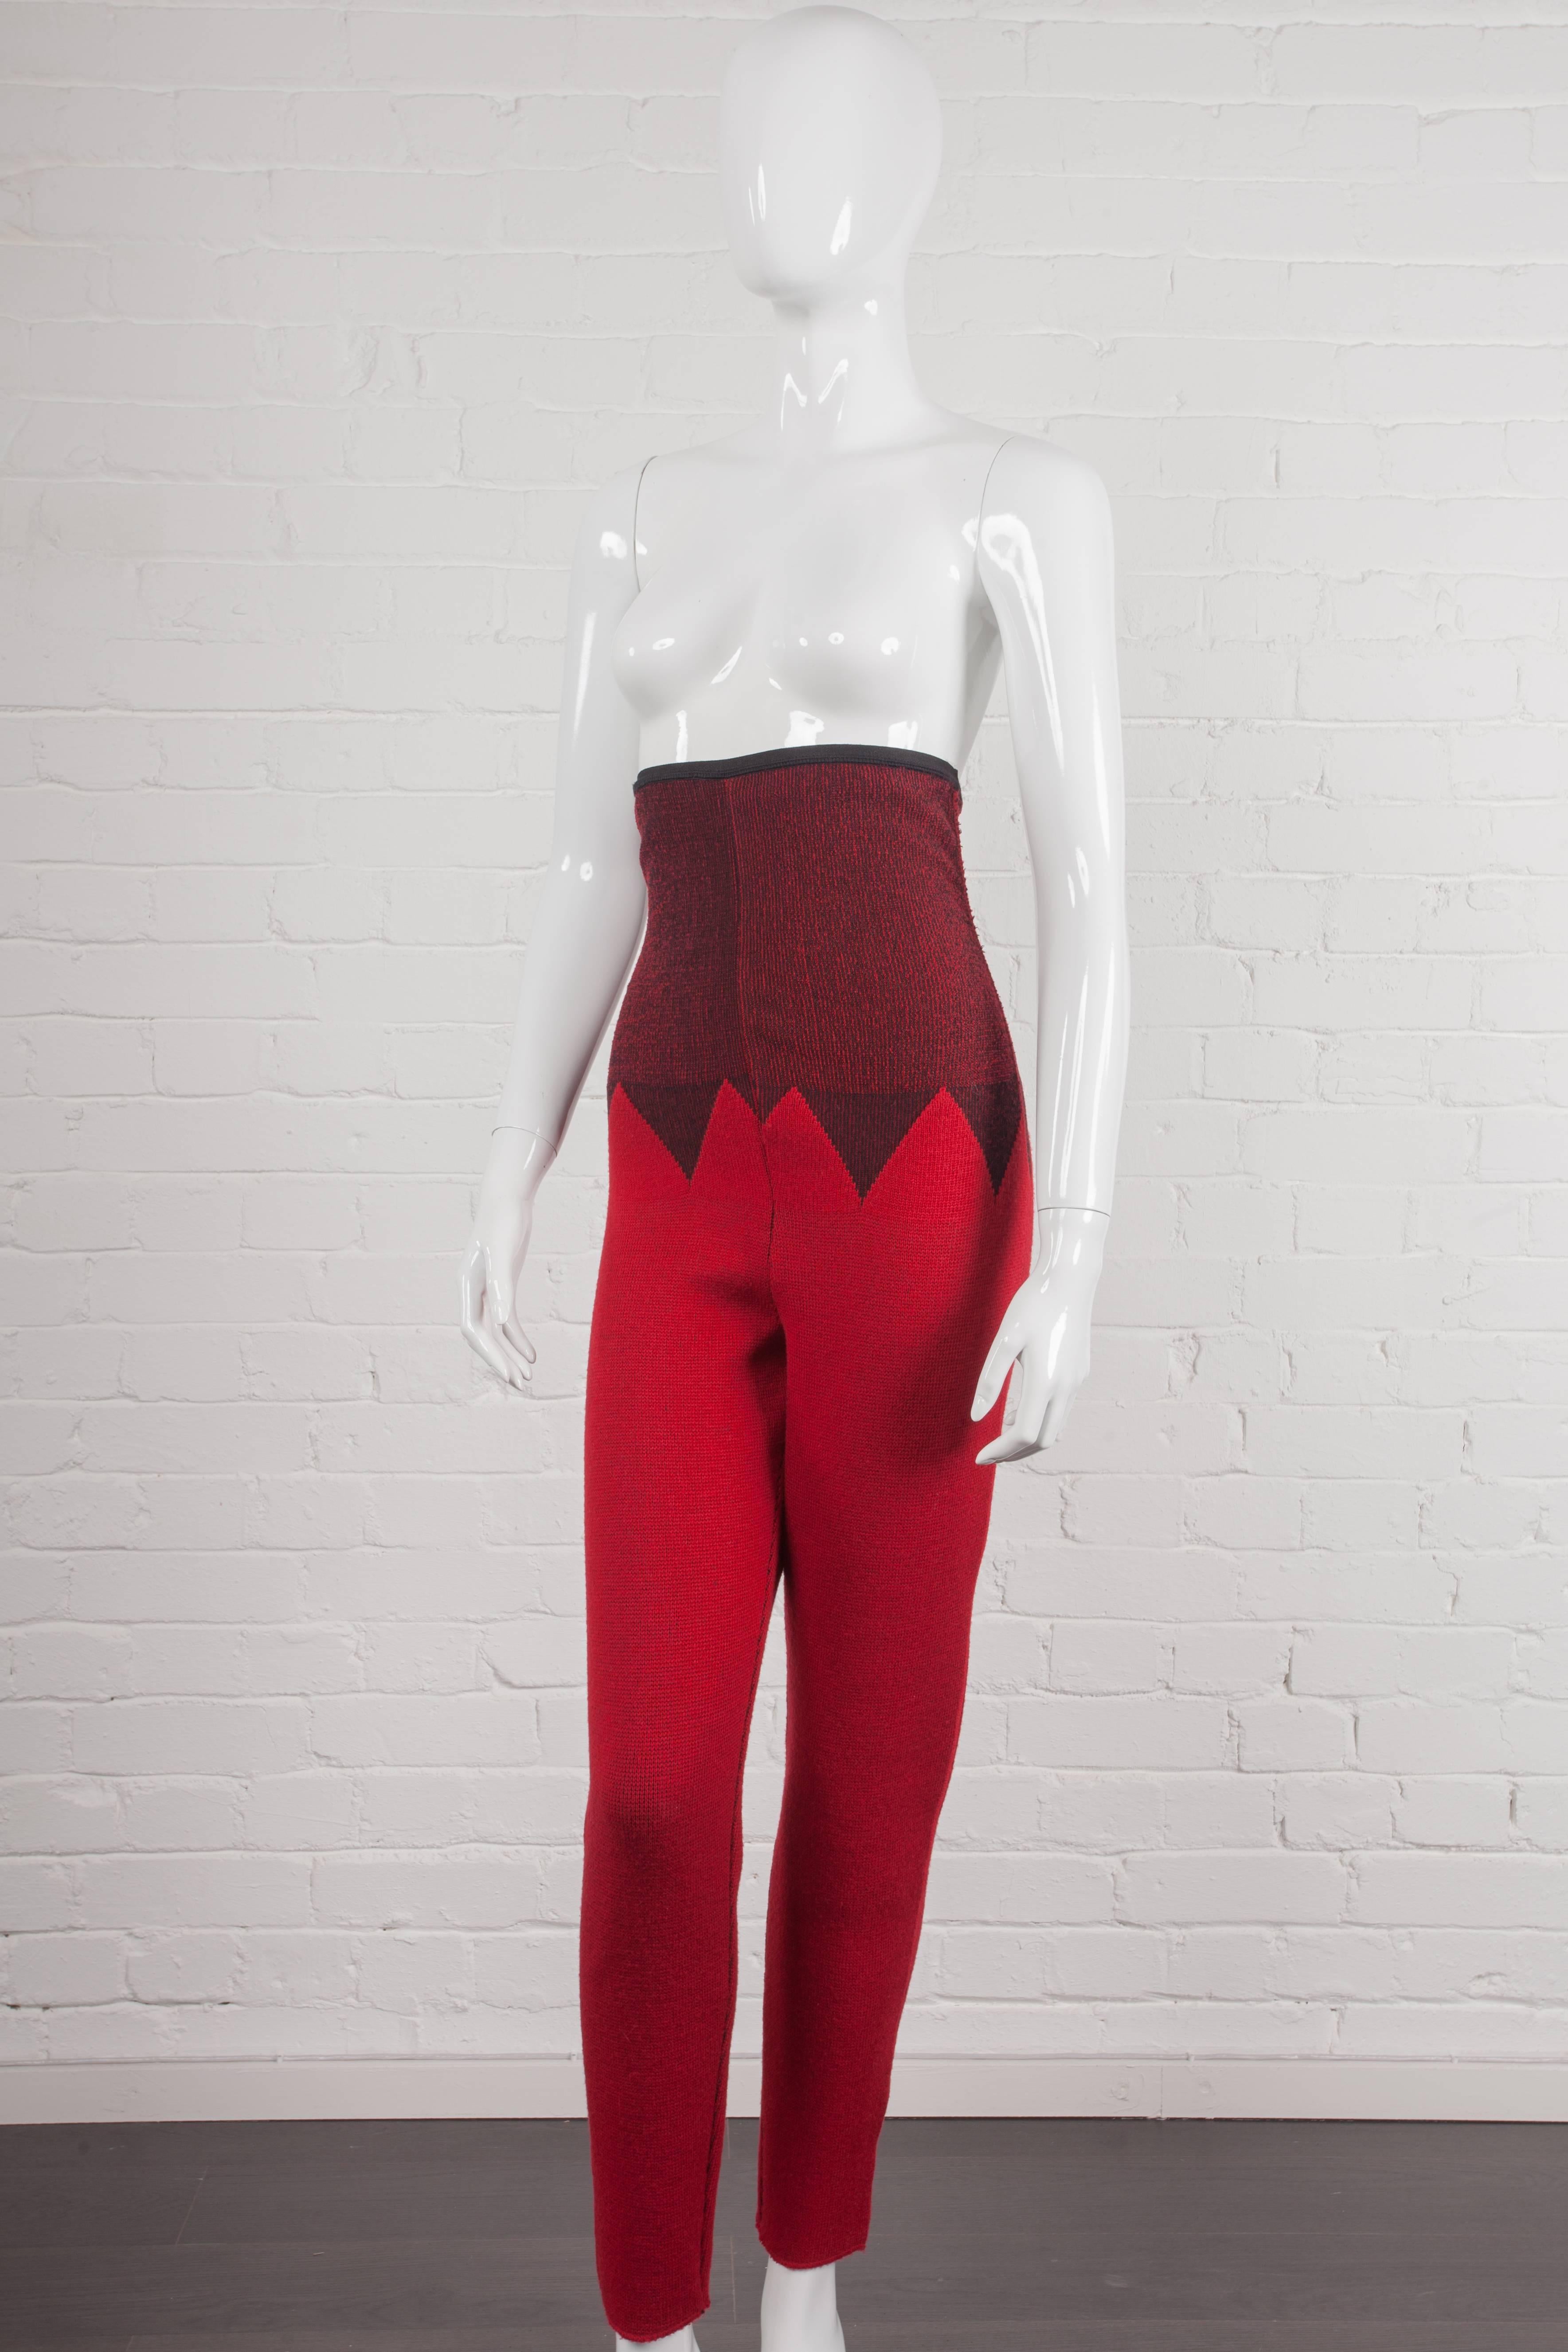 High-waisted stretch wool blend all-in-one trousers with boob tube bodice and elasticated over-breast band. From the Fall/Winter 1987/88 “Forbidden Gaultier” Collection by “JEAN PAUL GAULTIER pour EQUATOR”. Straight leg, with blended diamond design